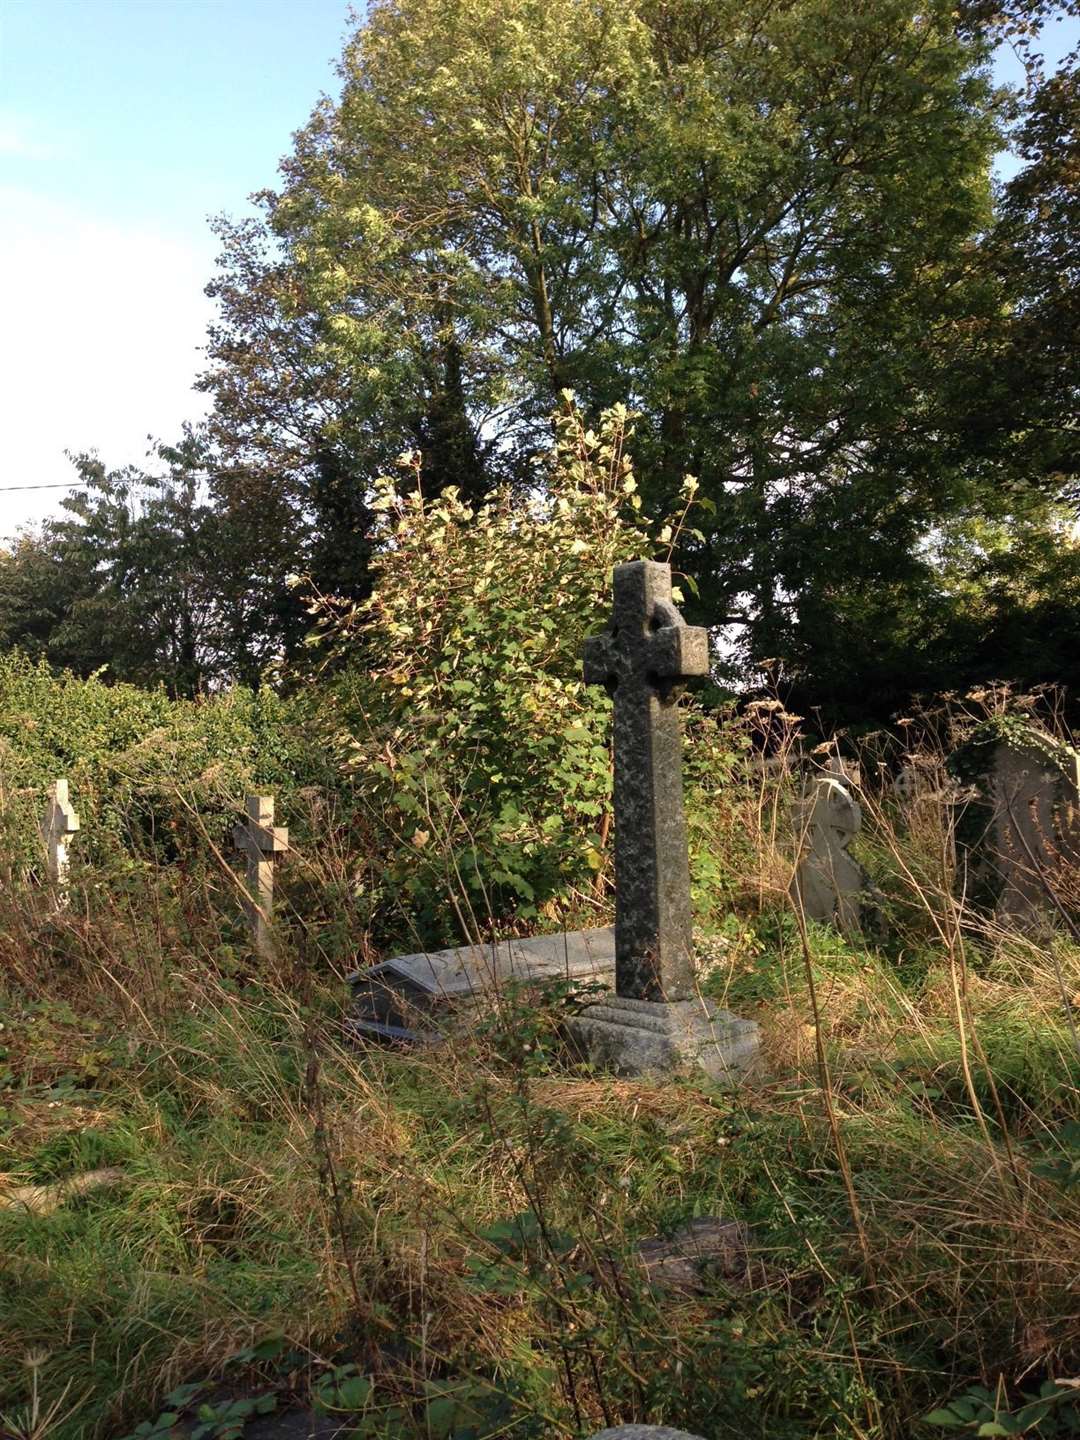 The overgrown cemetery will be transformed